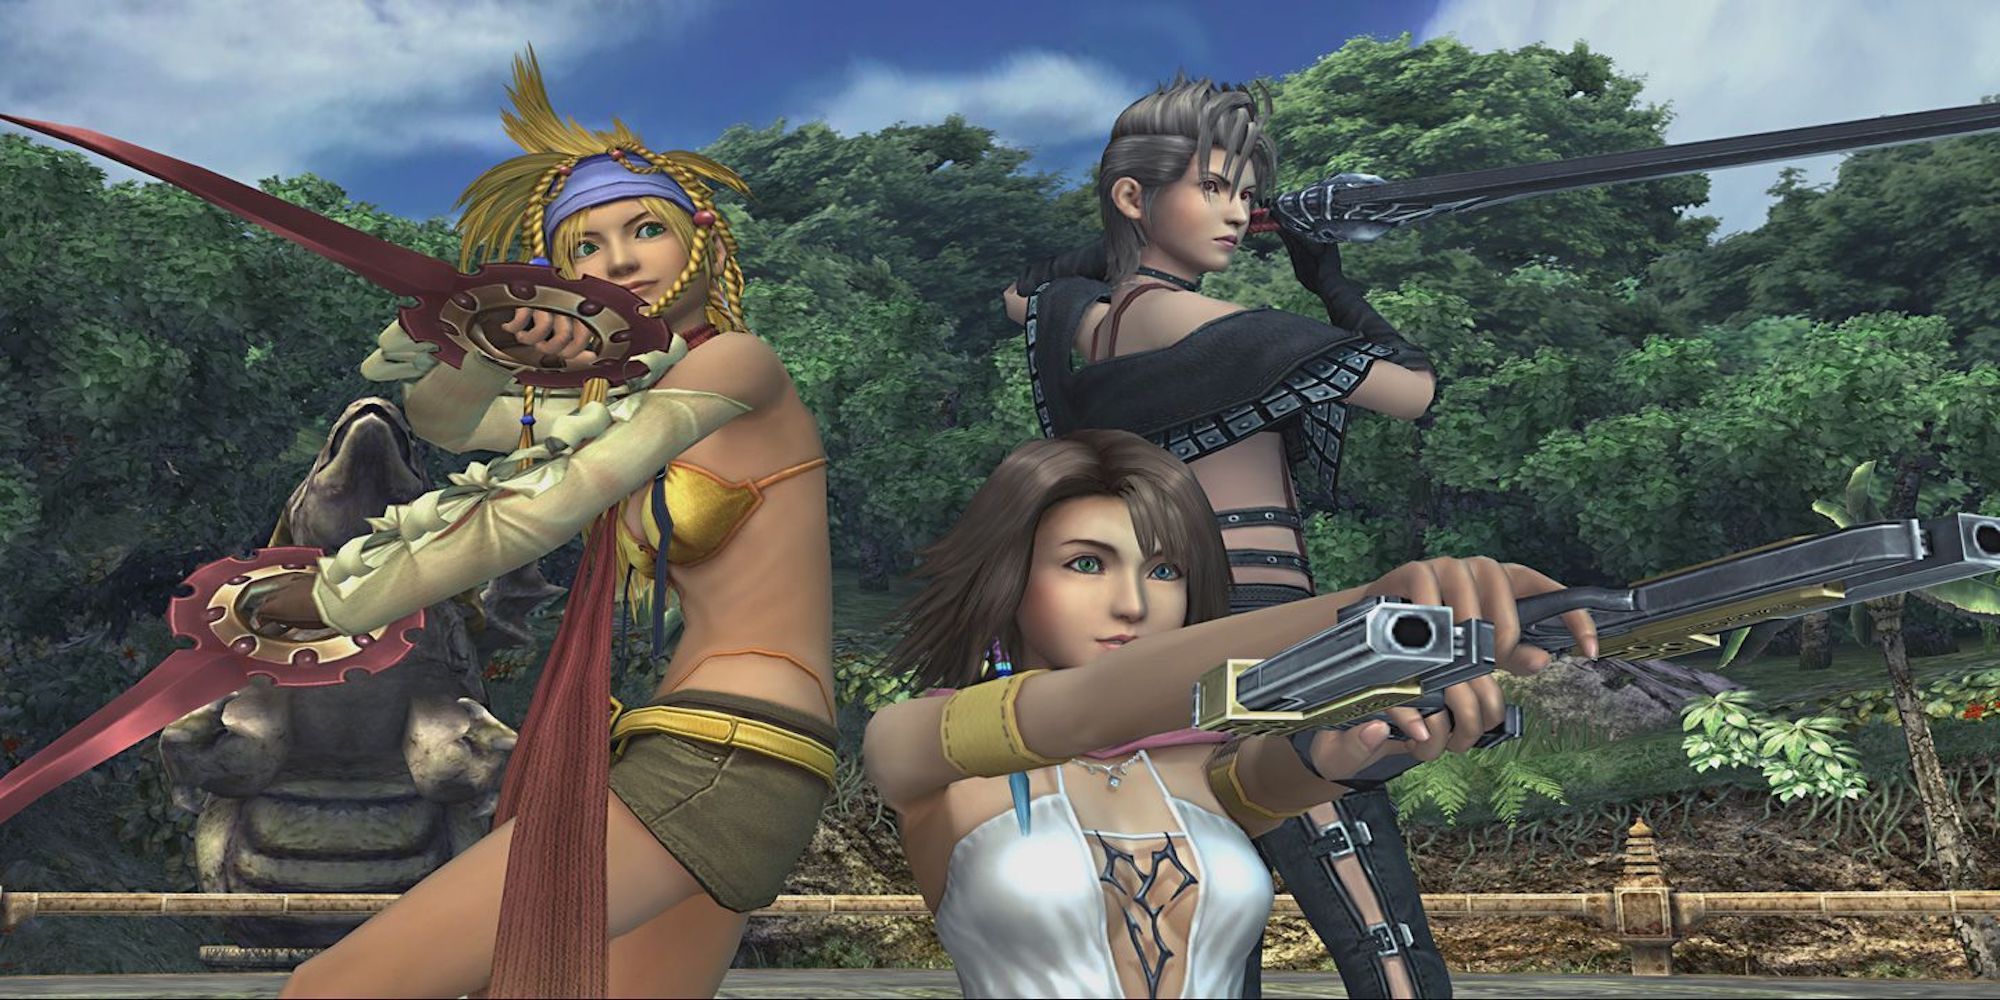 A cutscene featuring characters from Final Fantasy 10-2